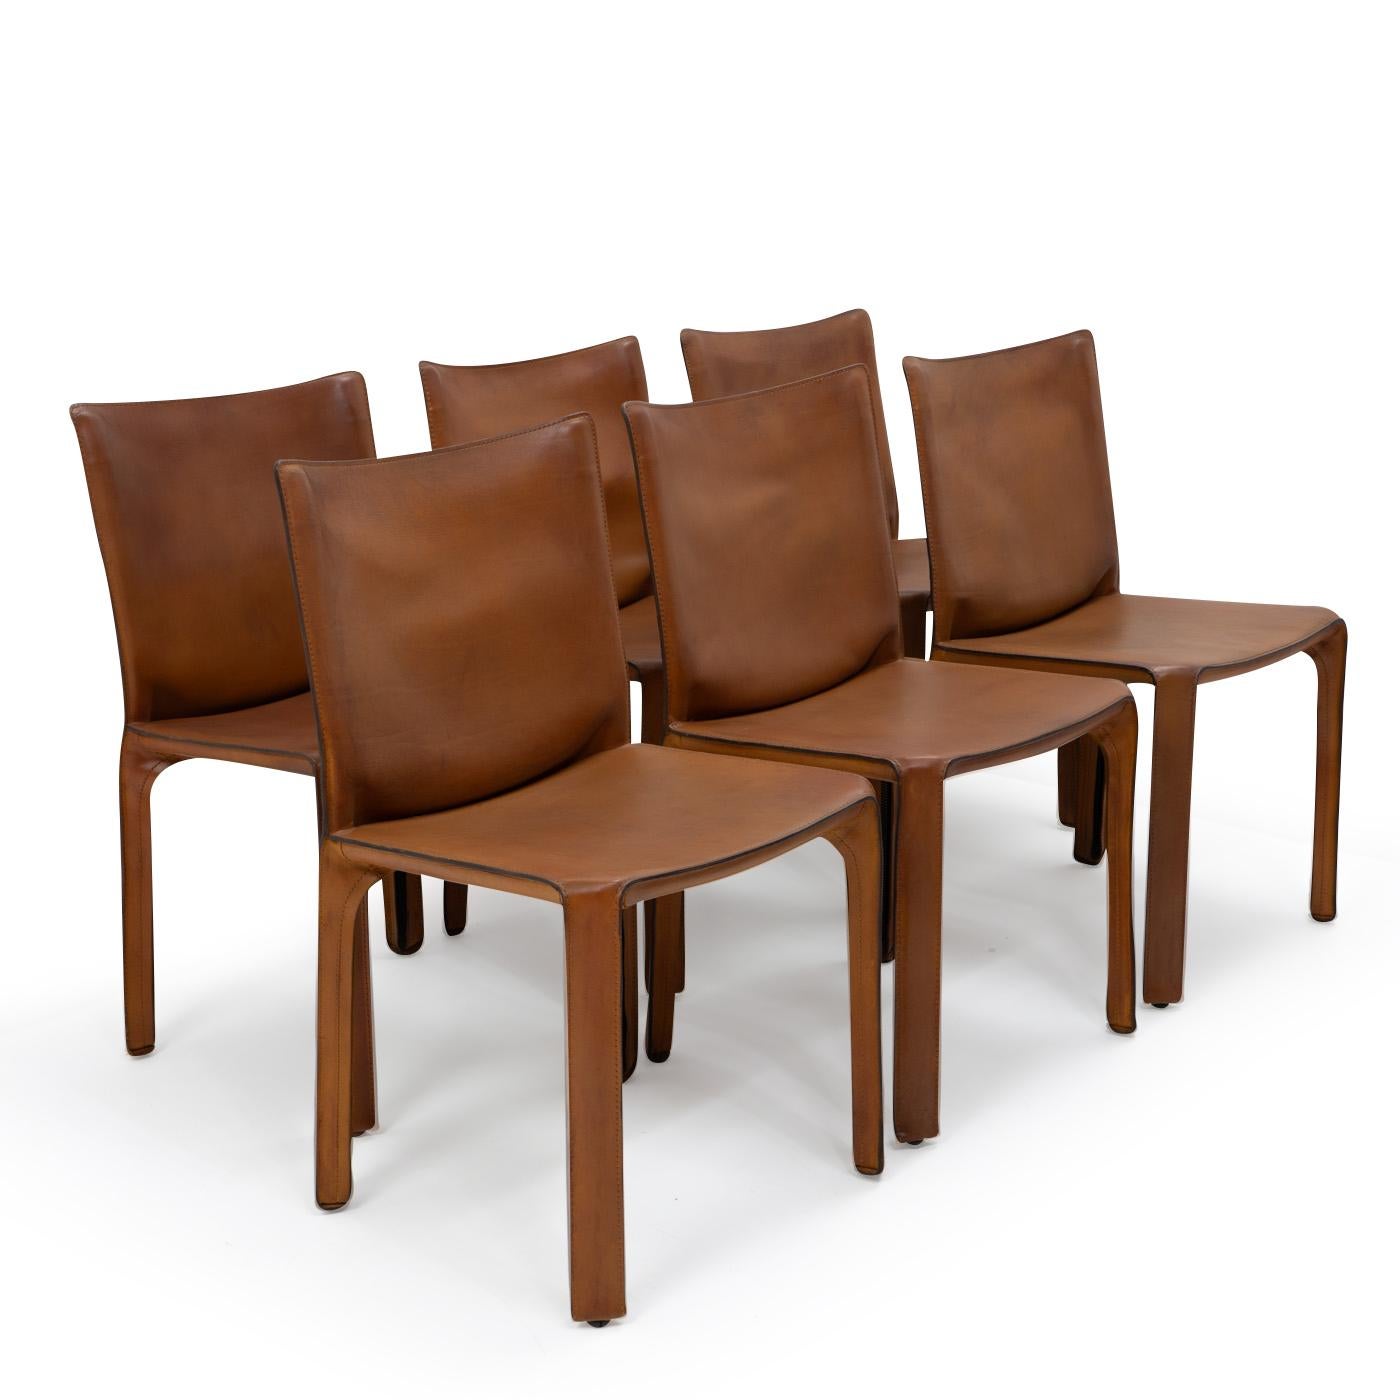 Set of six Cab 412 side chairs in patinated brown leather by Mario Bellini for Cassina.

The Cab chair is built up as a tubular frame over which thick saddle leather is fitted; the leather skin is kept in place with zippers on the inside legs.

A